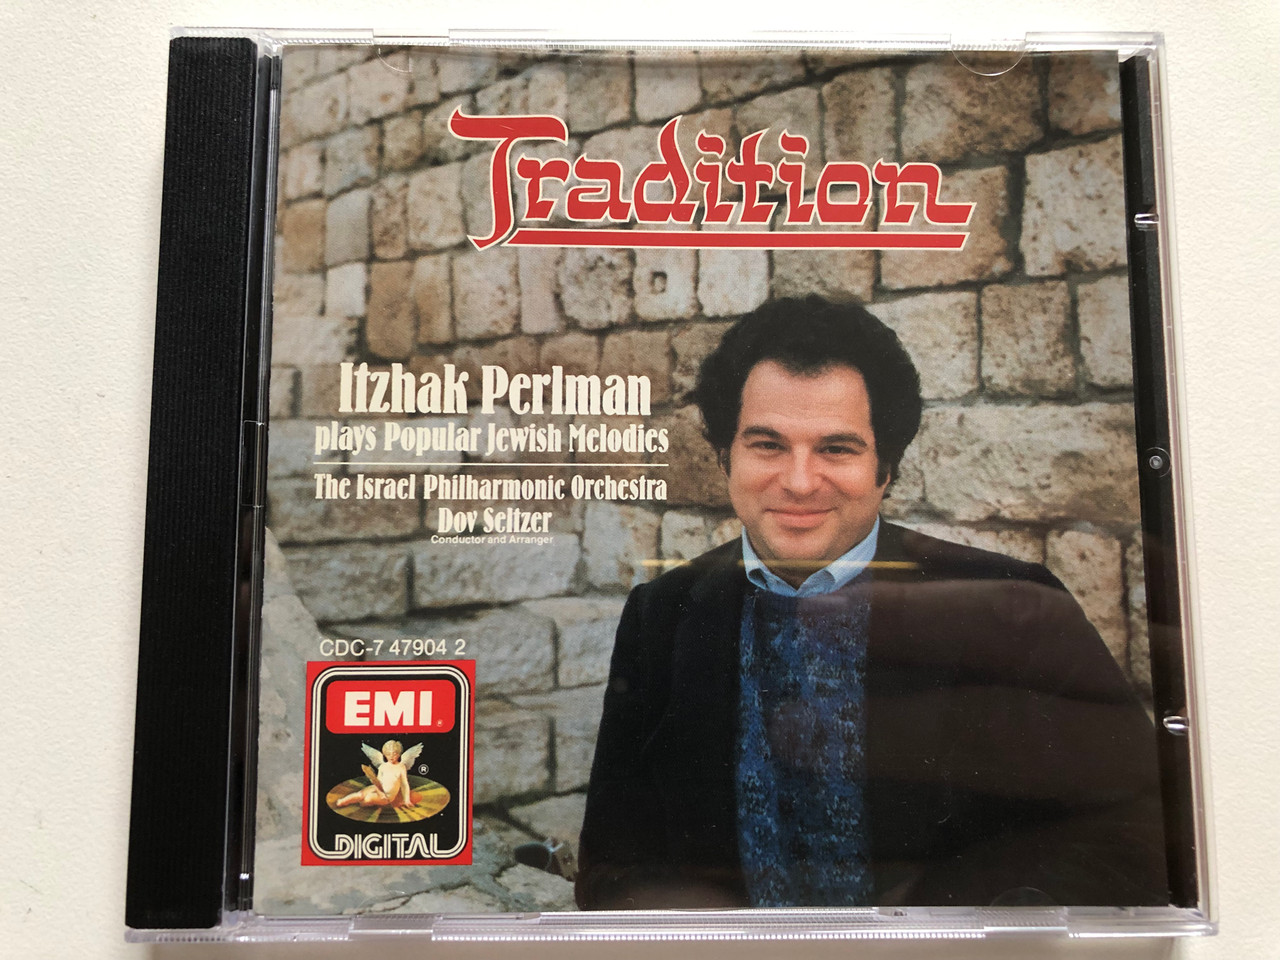 https://cdn10.bigcommerce.com/s-62bdpkt7pb/products/0/images/306131/Tradition_-_Itzhak_Perlman_Plays_Popular_Jewish_Melodies_-_The_Israel_Philharmonic_Orchestra_Dov_Seltzer_conductor_and_arranger_EMI_Digital_Audio_CD_1987_CDC-7_47904_2_1__58487.1698158523.1280.1280.JPG?c=2